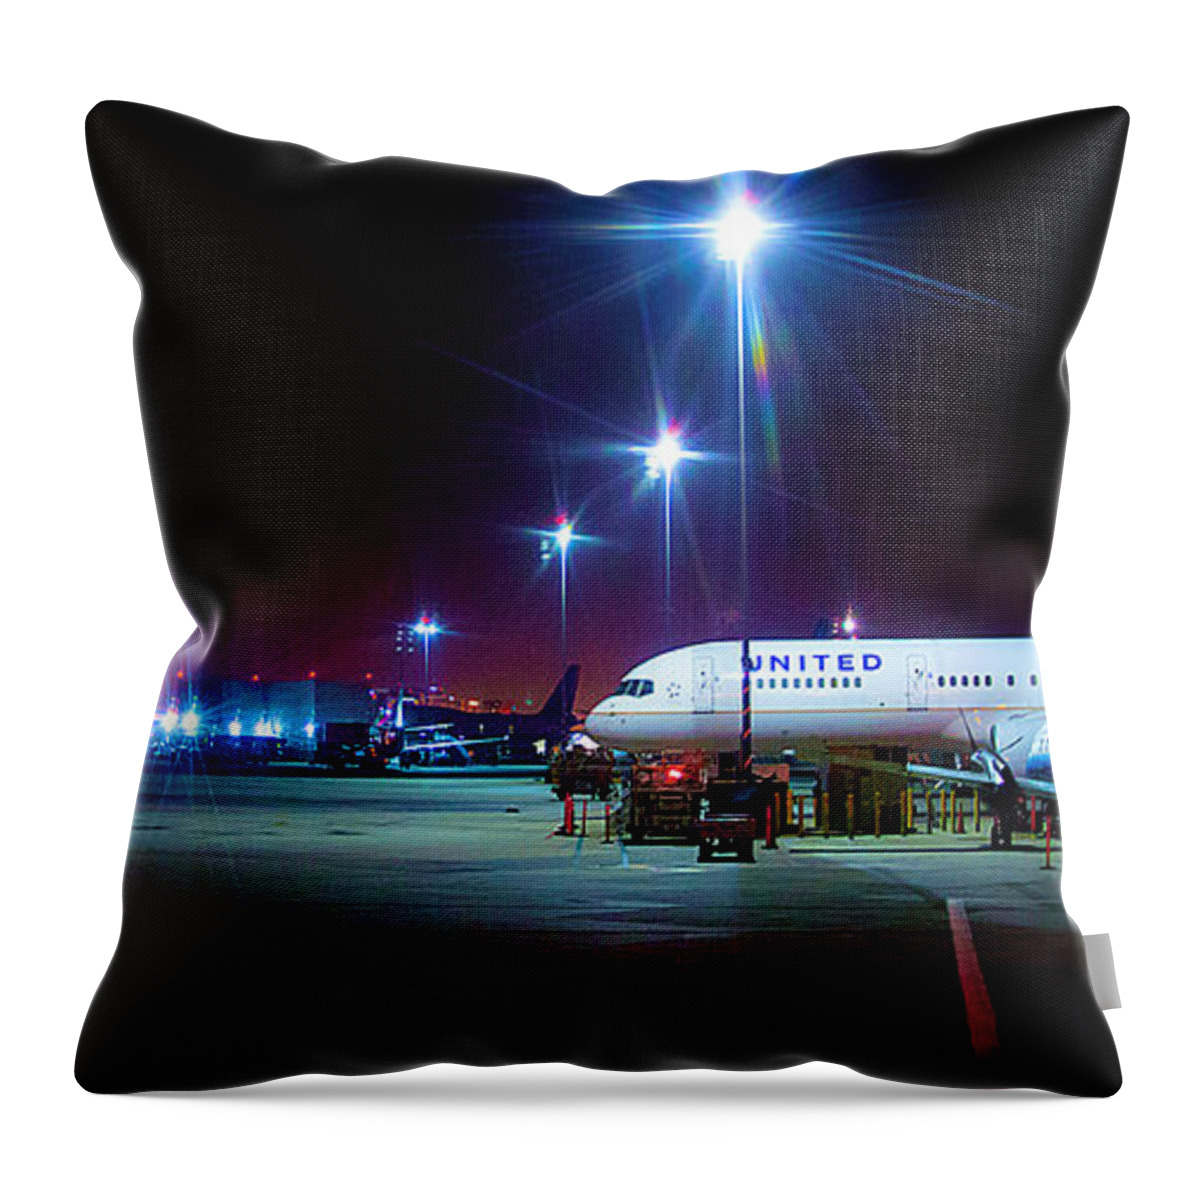 Jet Plane Photography Throw Pillow featuring the photograph Taking Off On A Jet Plane Looking Out The Window by Jerry Cowart